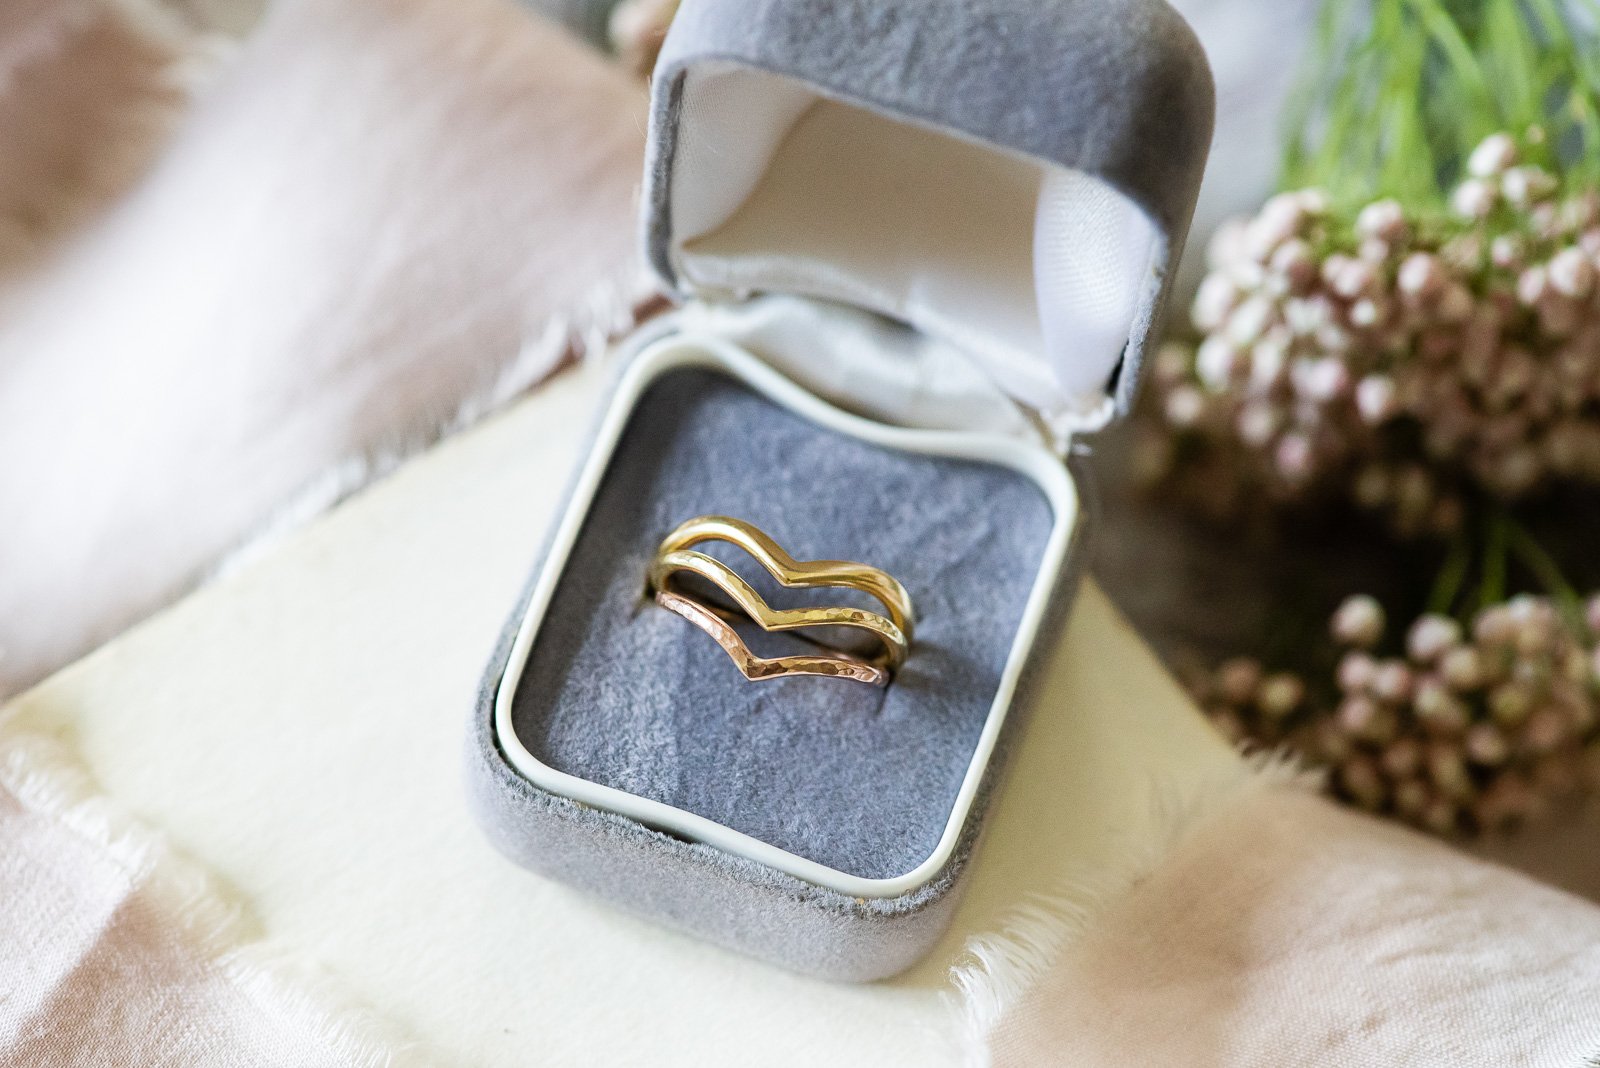  Three handmade, narrow wishbone wedding bands in gold, hammered gold and silver displayed in a box.   Photo by: Fiona Kelly 